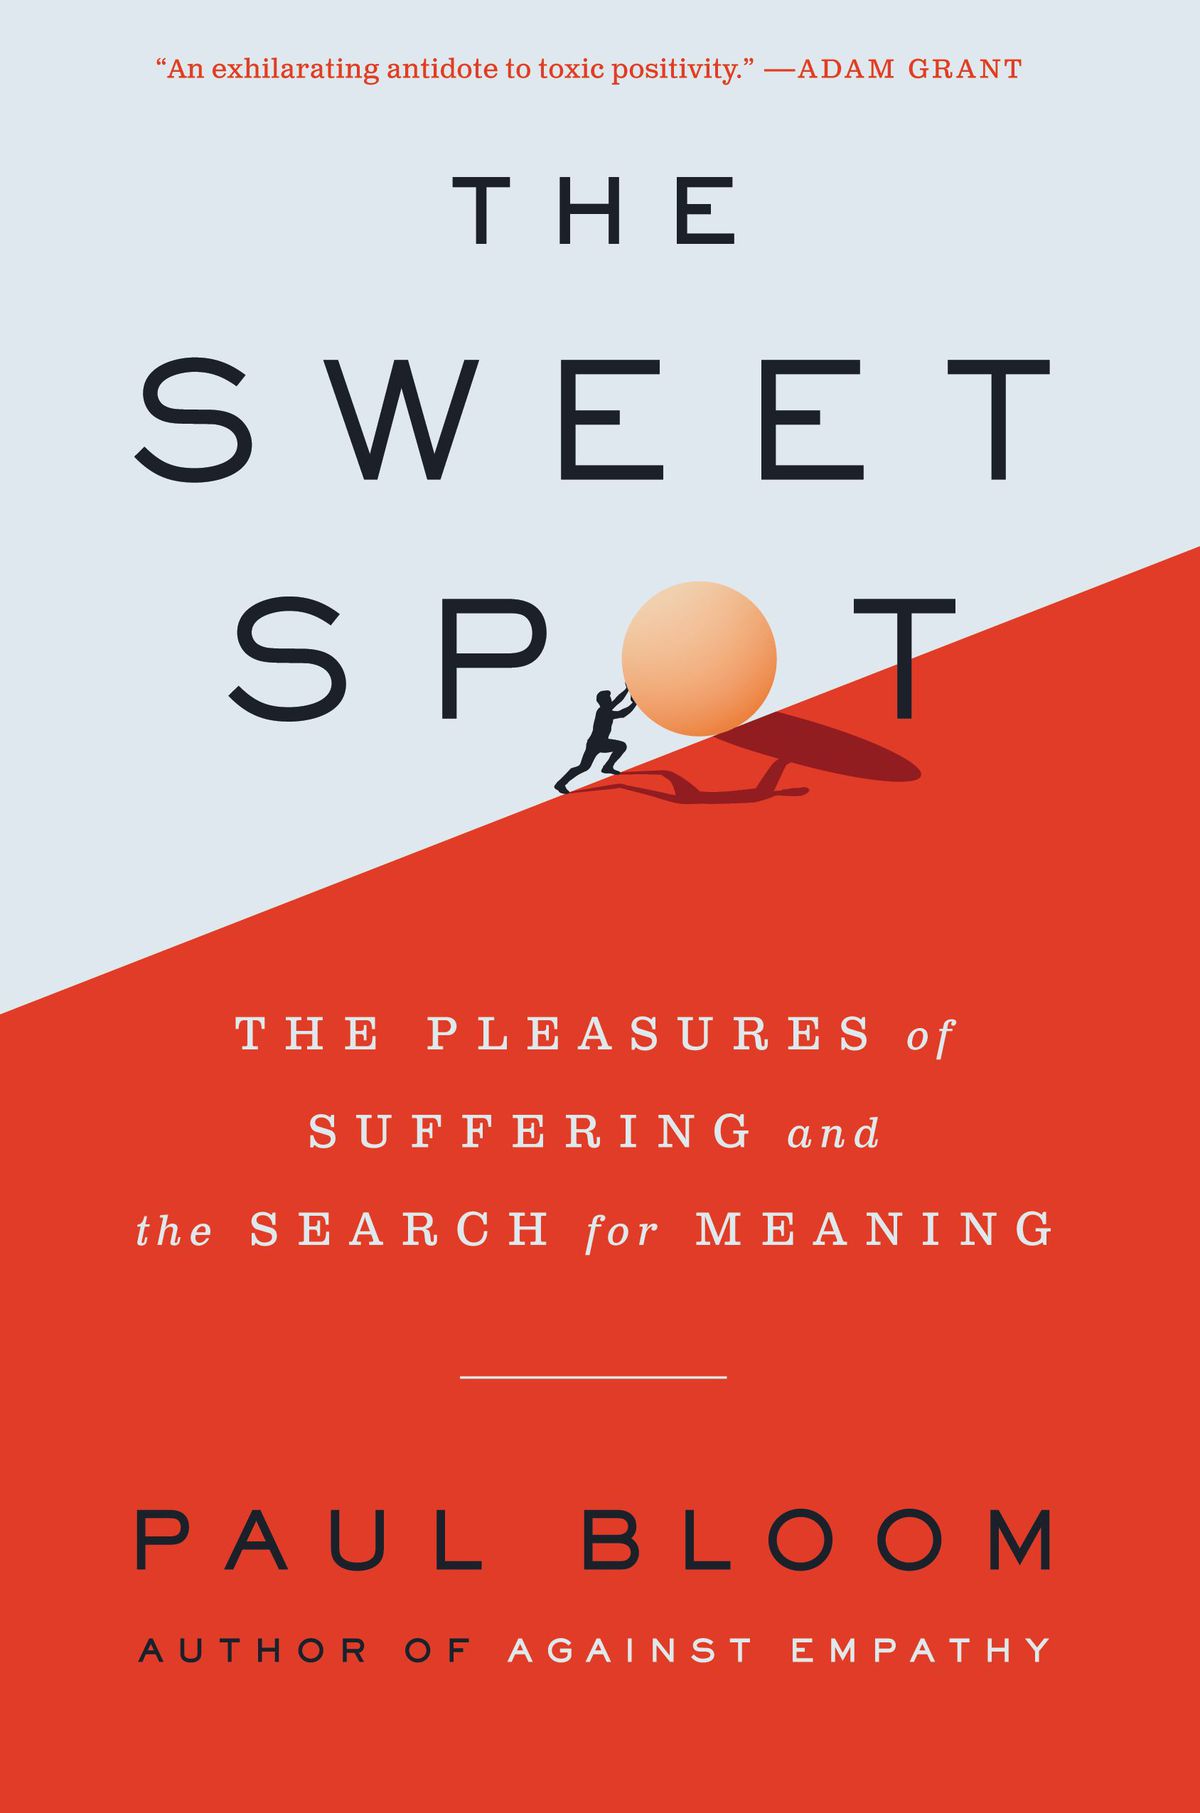 The cover of the book “The Sweet Spot: The Pleasures of Suffering and the Search for Meaning,” by Paul Bloom, author of “Against Empathy.”